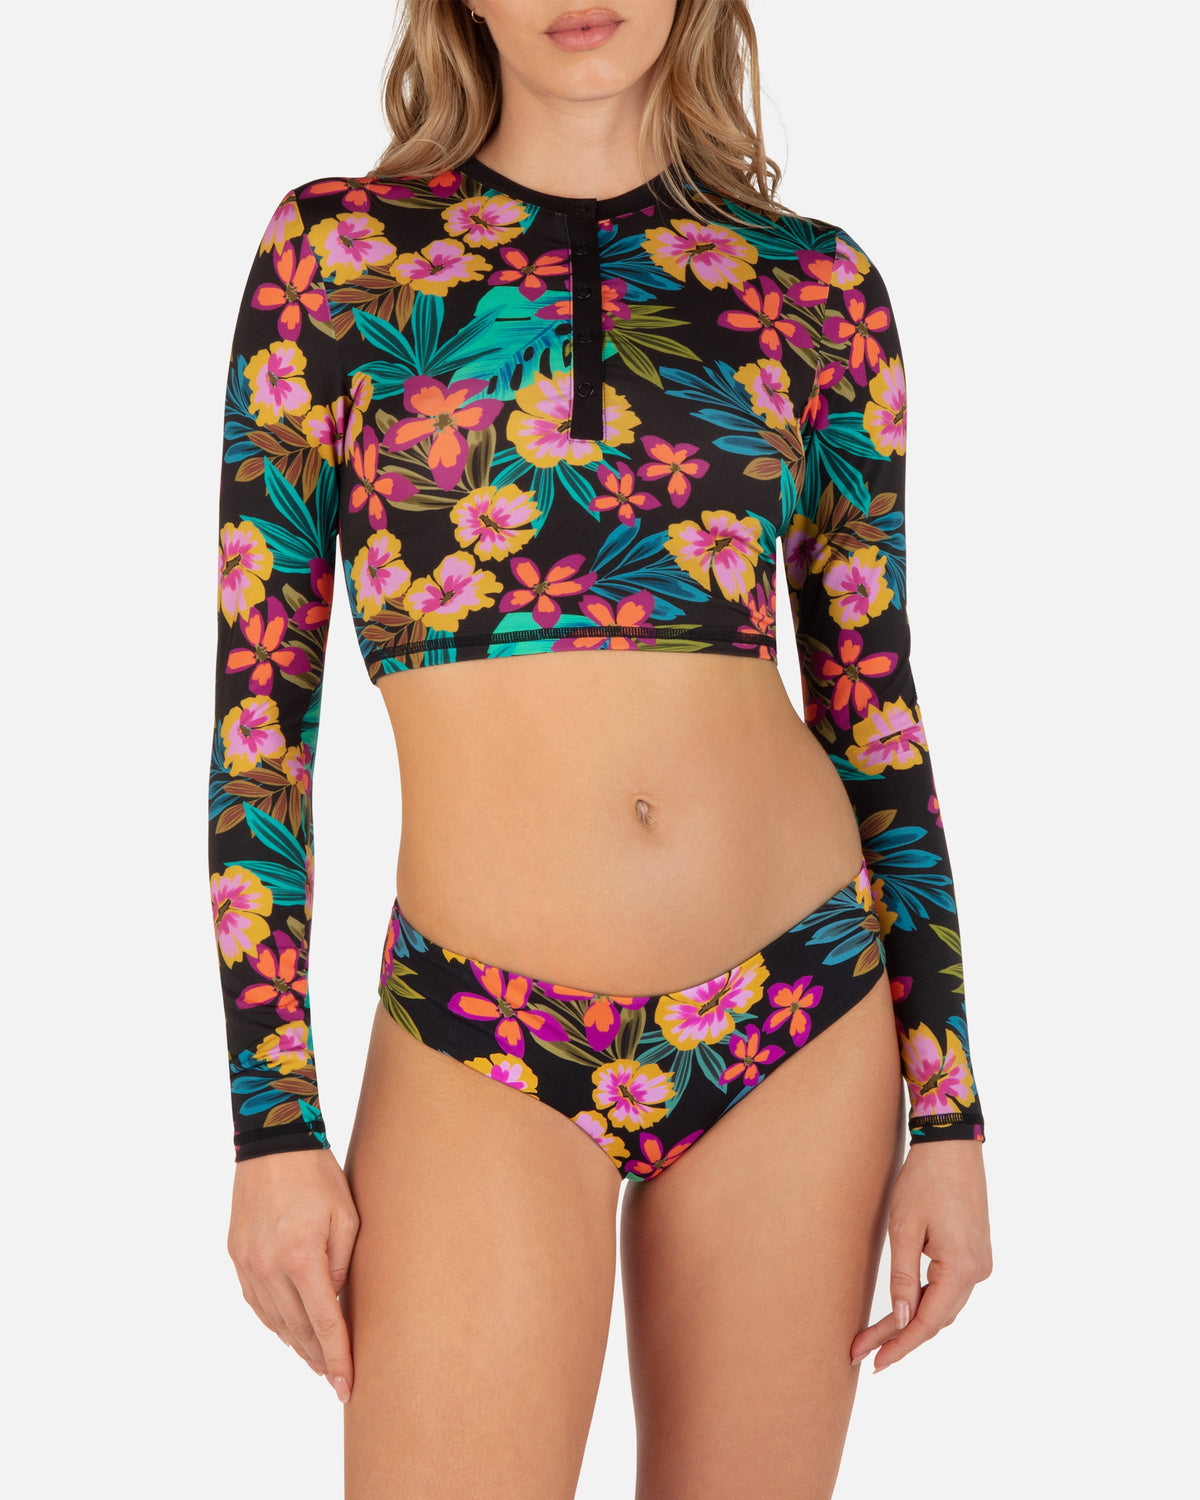 Rash Guard for Women Two Piece Long Sleeve Swimsuits Zipper Swim Shirt  Bathing Suit UPF 50 with Built in Bra-Black Hibiscus Print-S at   Women's Clothing store